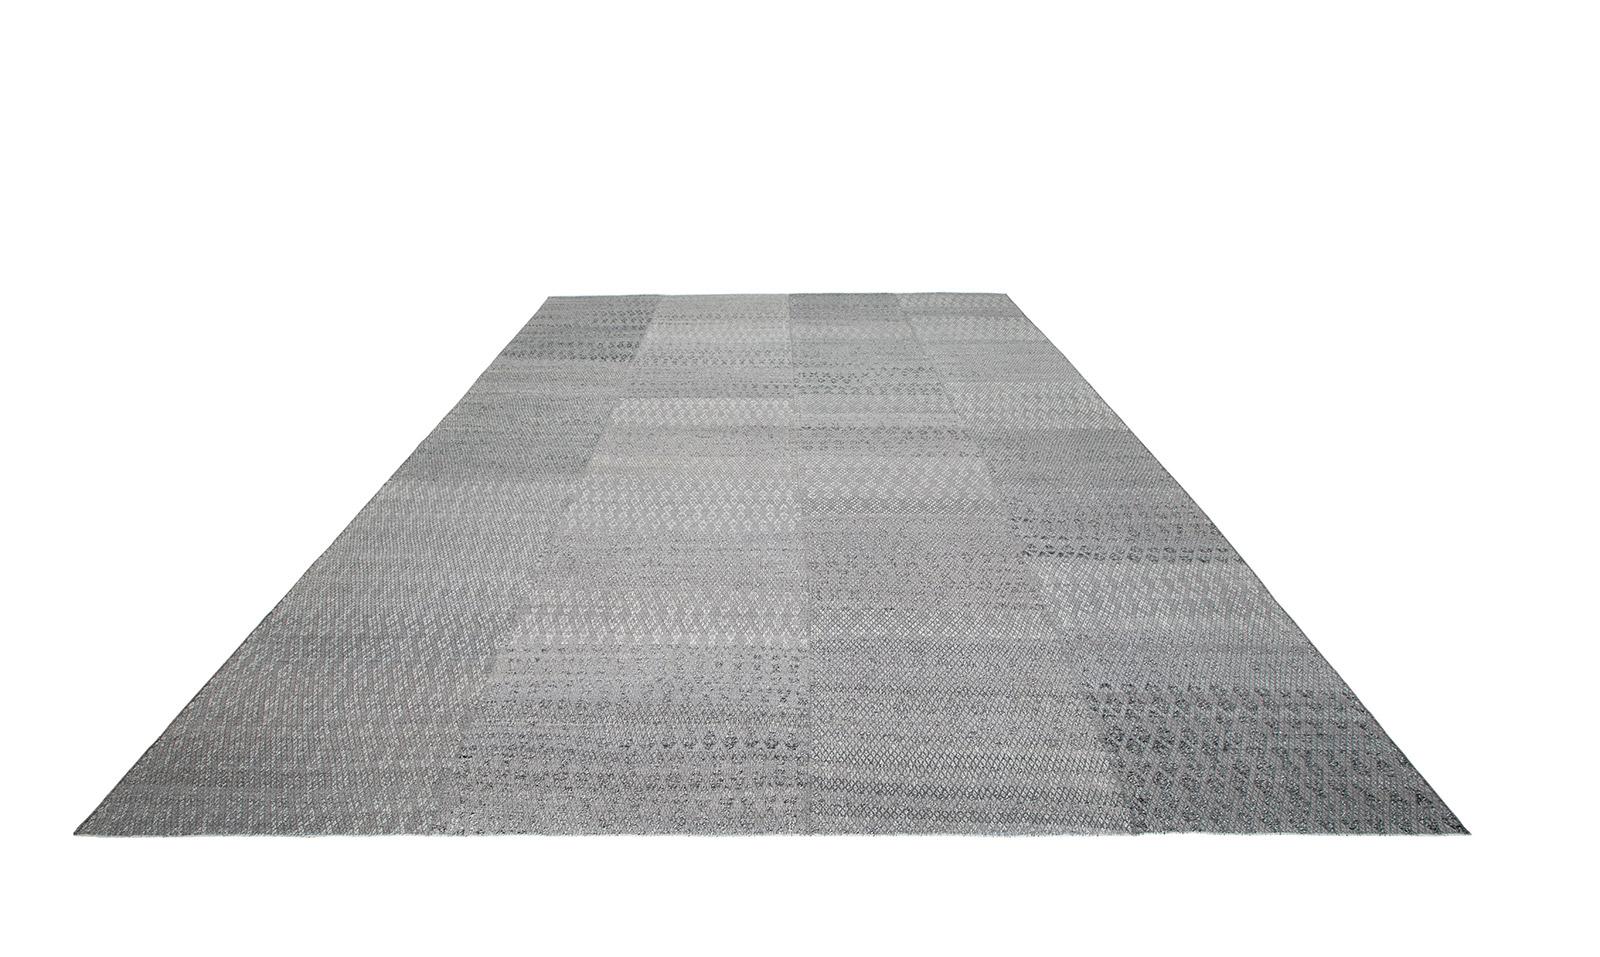 Hand-Woven Decorative Modern Flat-Weave Rug in Textured Grey Color For Sale